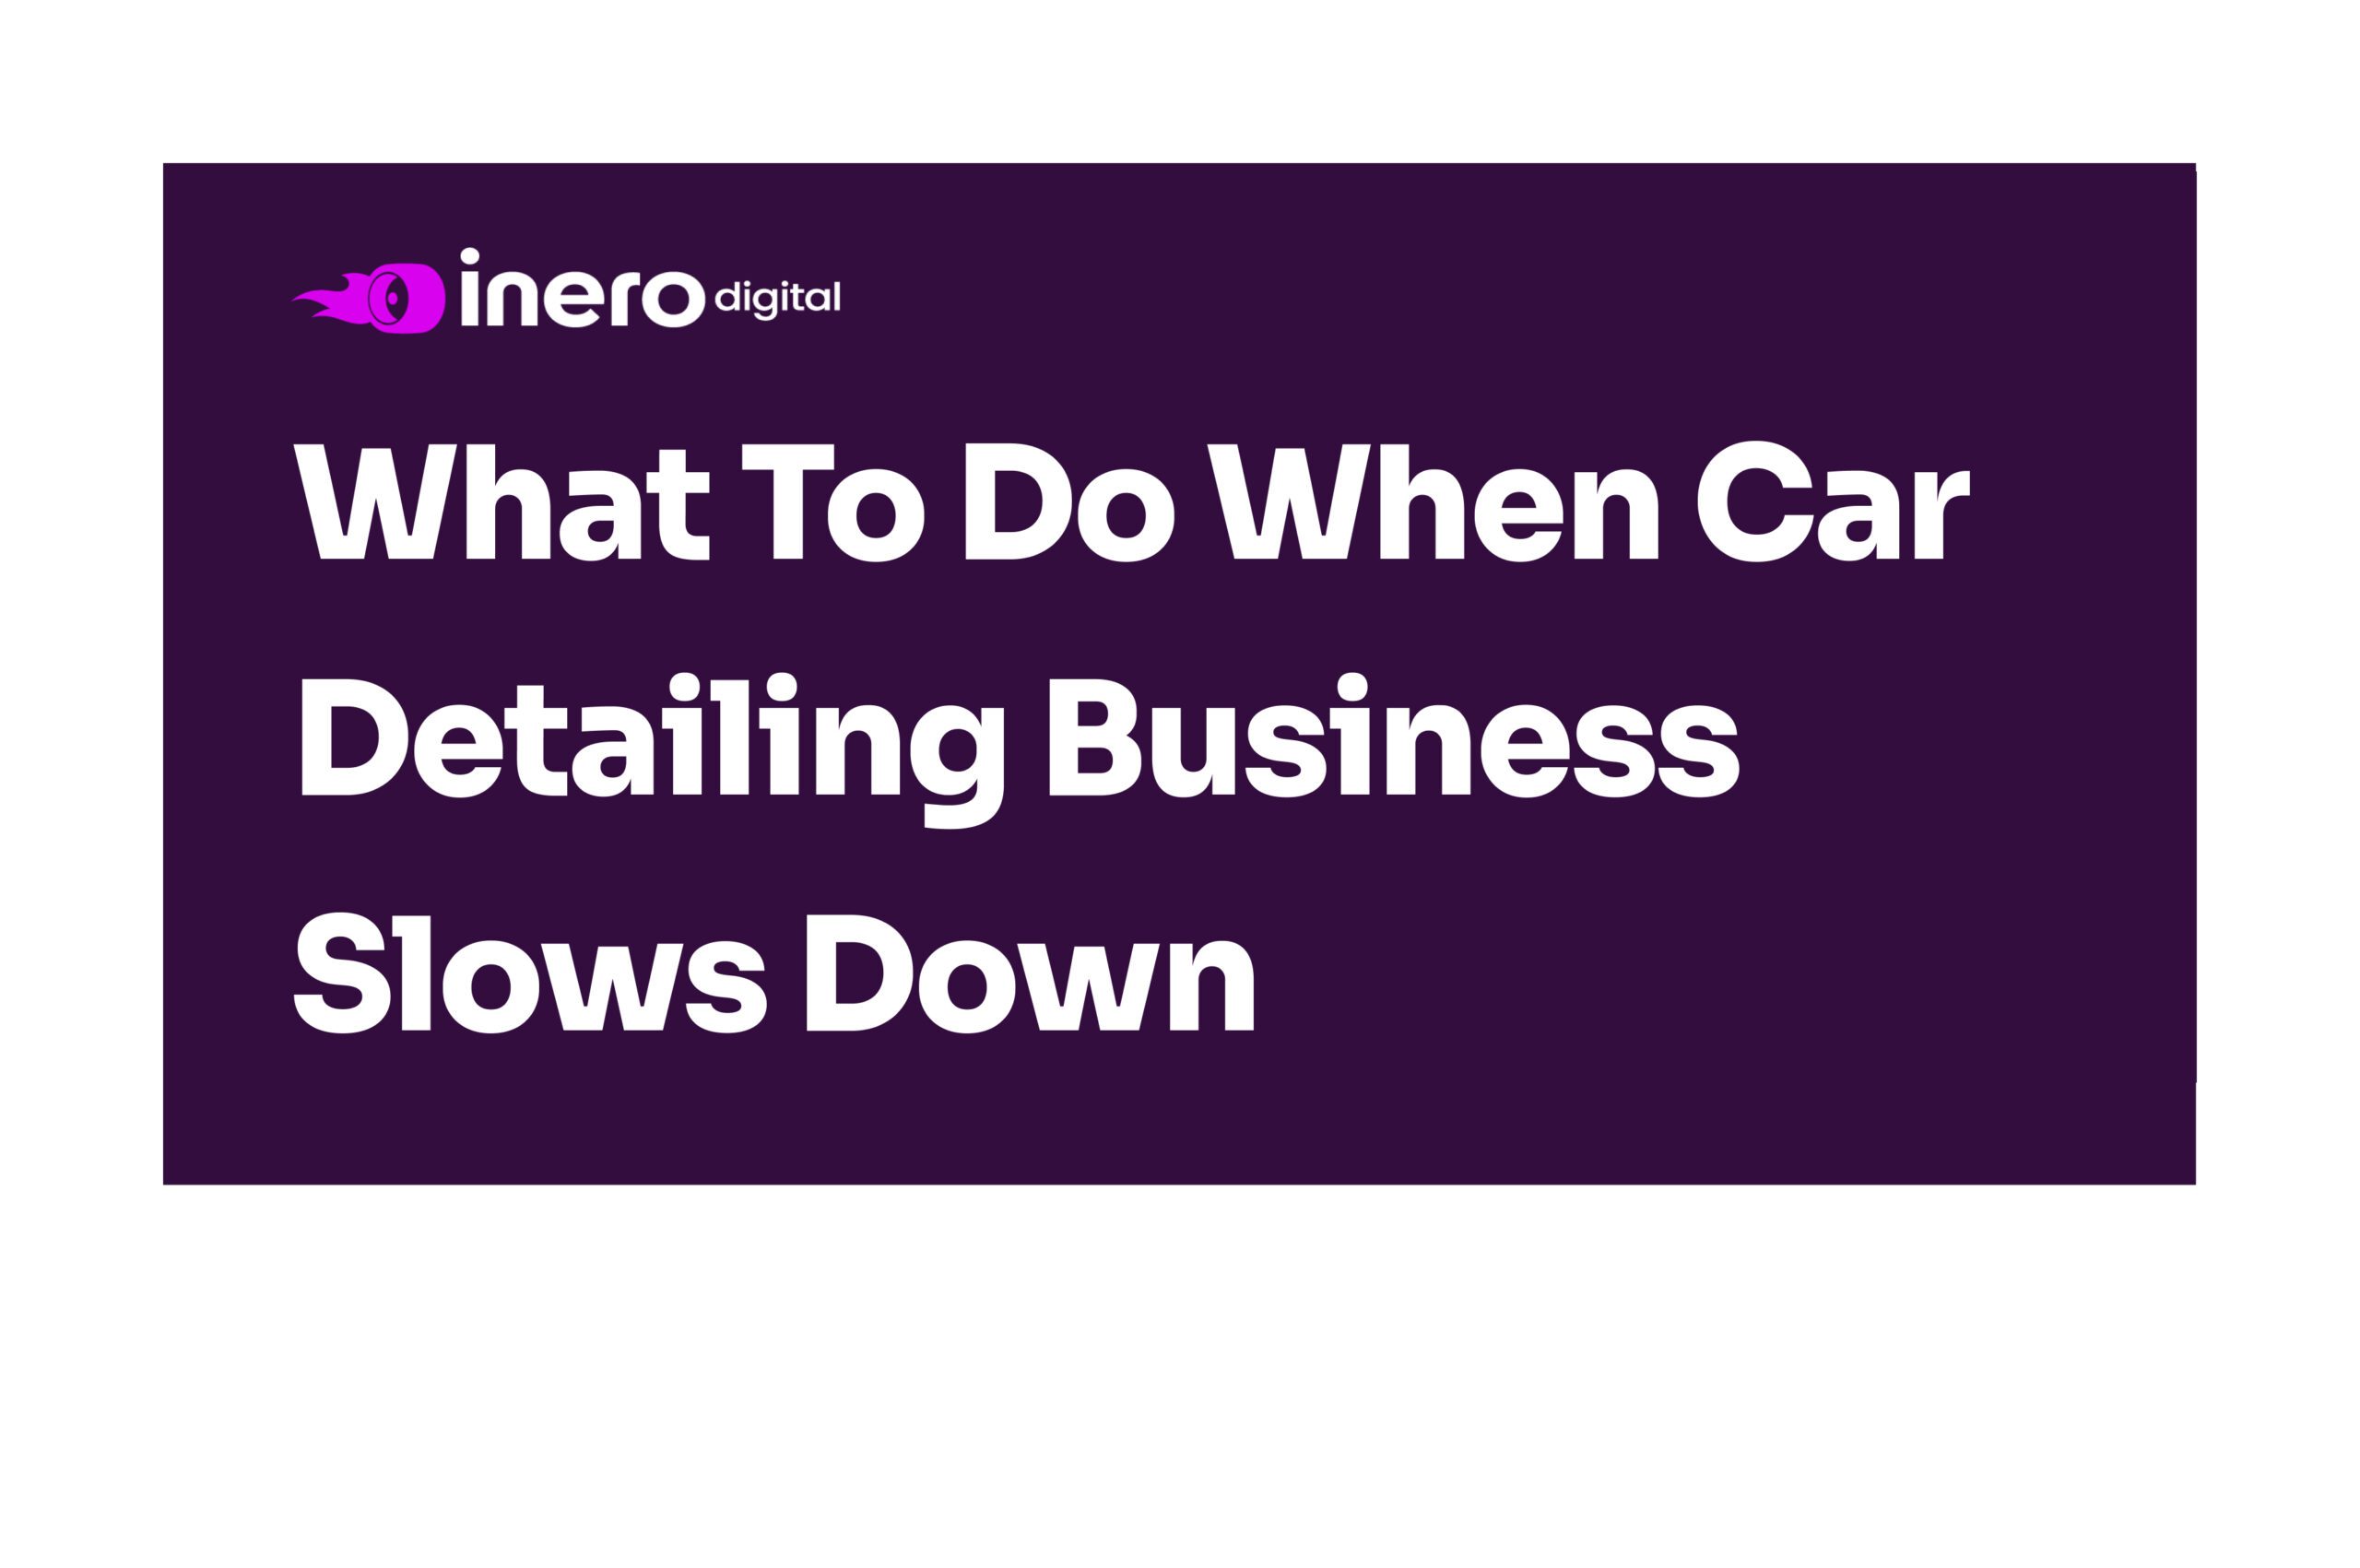 What to Do When Car Detailing Business Slows Down